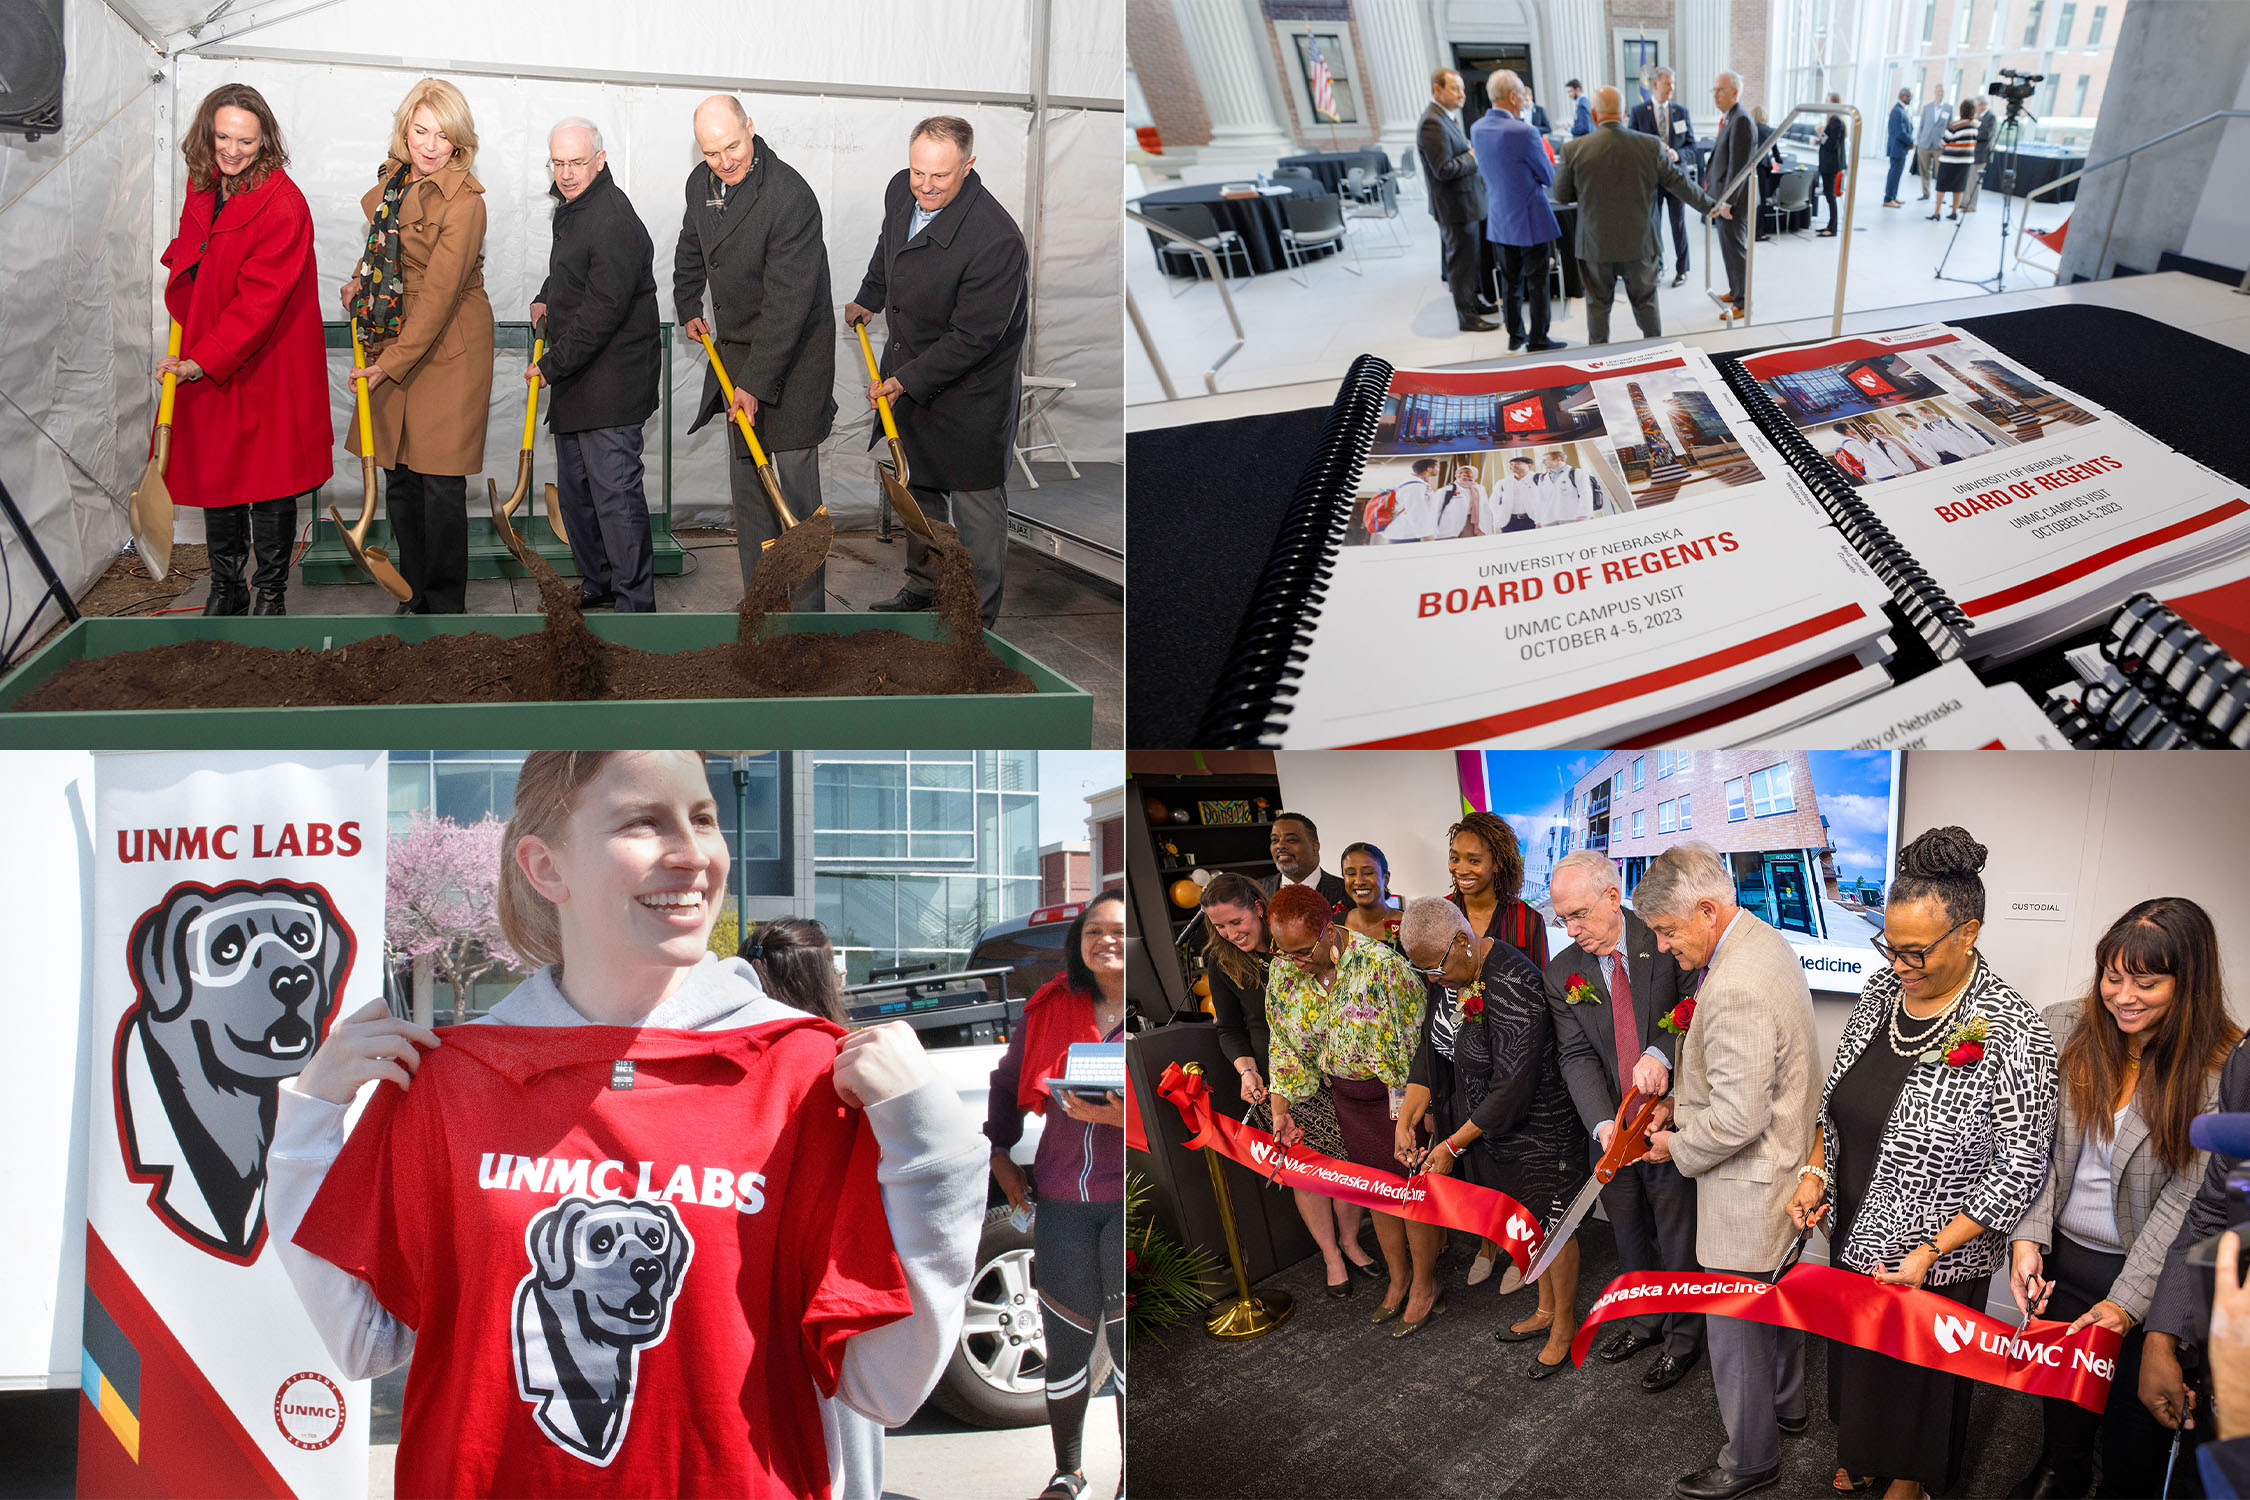 Clockwise from top left&comma; UNMC Chancellor Jeffrey P&period; Gold&comma; MD&comma; and Mayor Jean Stothert led the groundbreaking for the CORE Building&comma; UNMC welcomed the NU Board of Regents to campus in October&comma; med center leadership cut the ribbon on the Community Wellness Collaborative in the Highlander neighborhood&comma; and UNMC students chose the Labs as UNMC&apos;s official mascot&period;